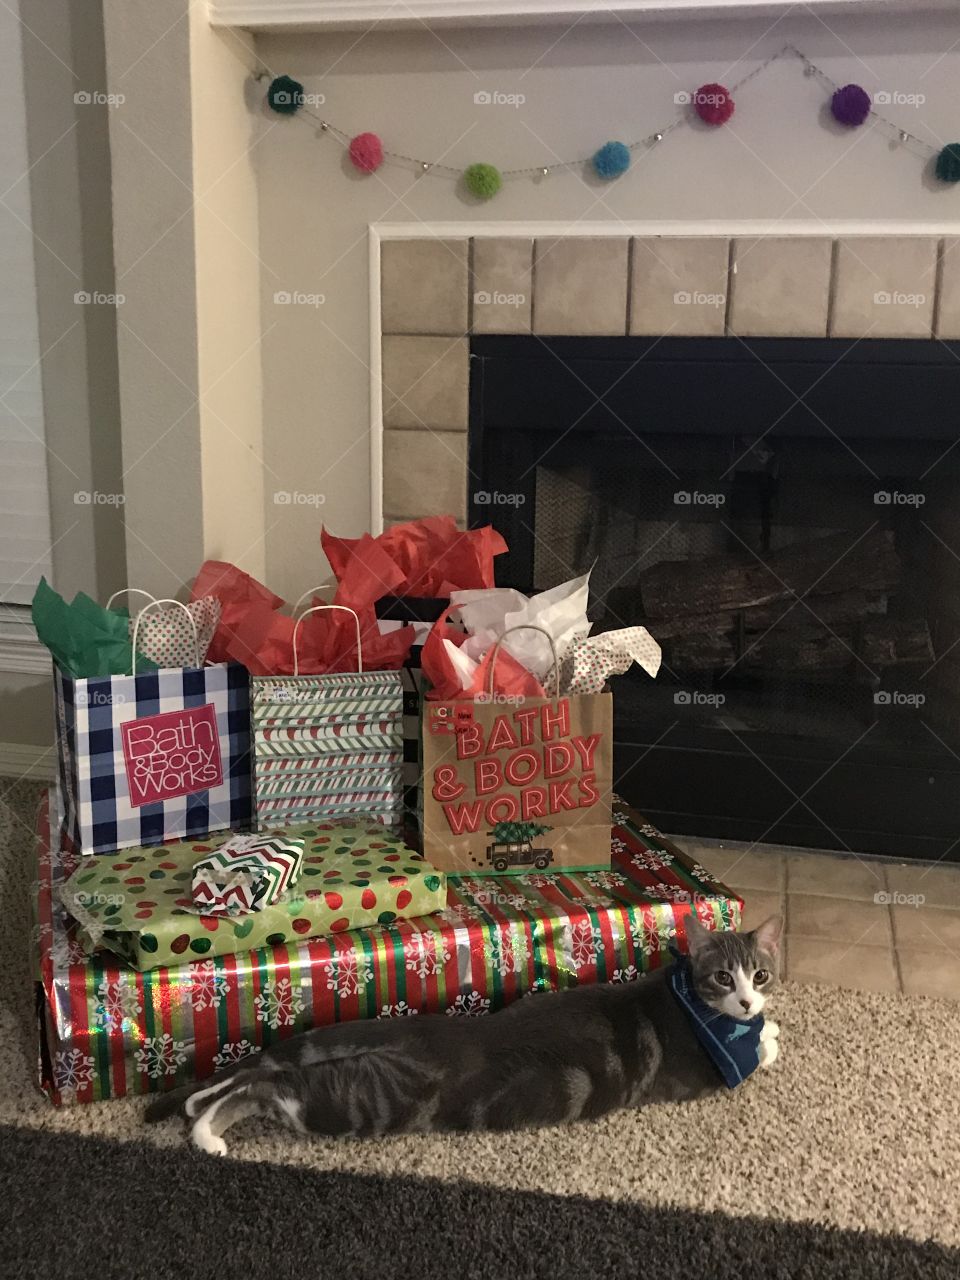 A cute kitten stretched out by a pile of beautifully wrapped Christmas gifts.